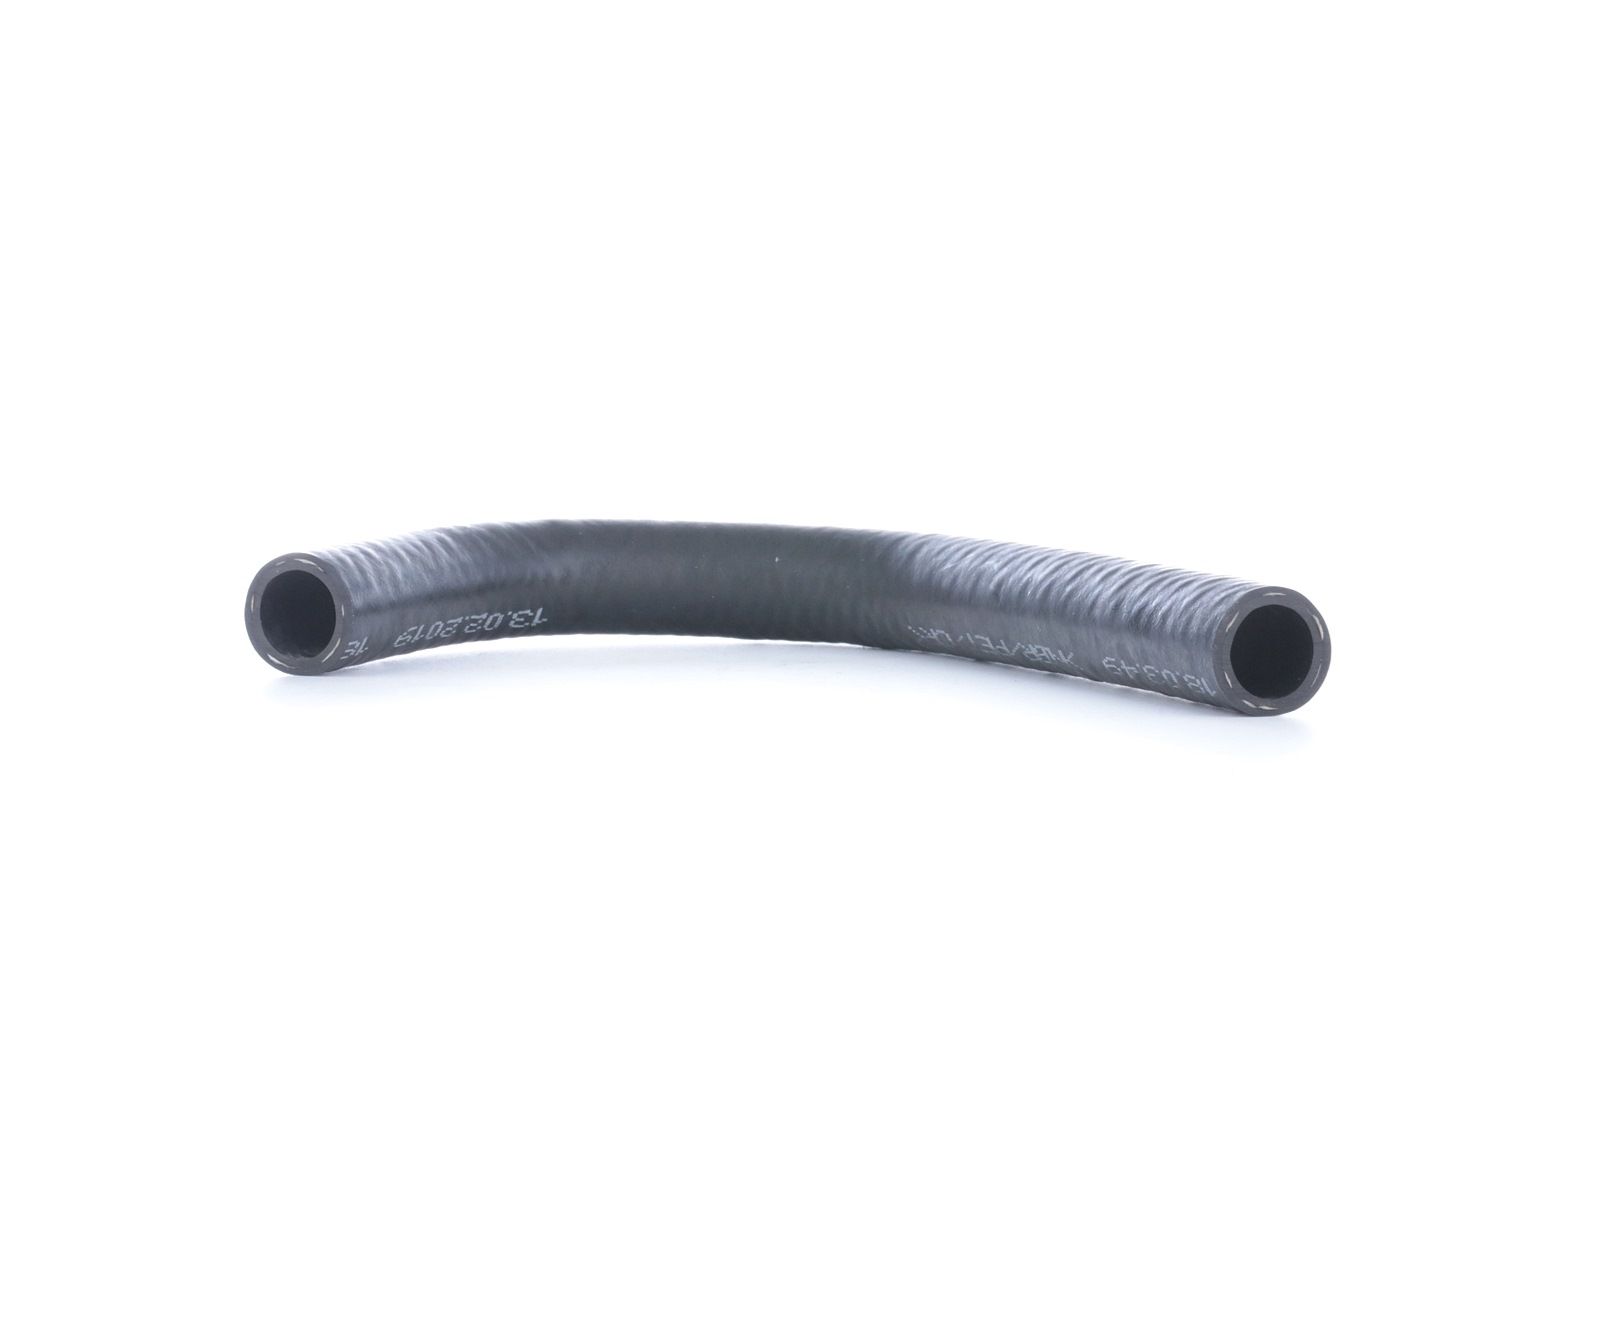 BMW Hydraulic Hose, steering system MEYLE 359 202 0047 at a good price